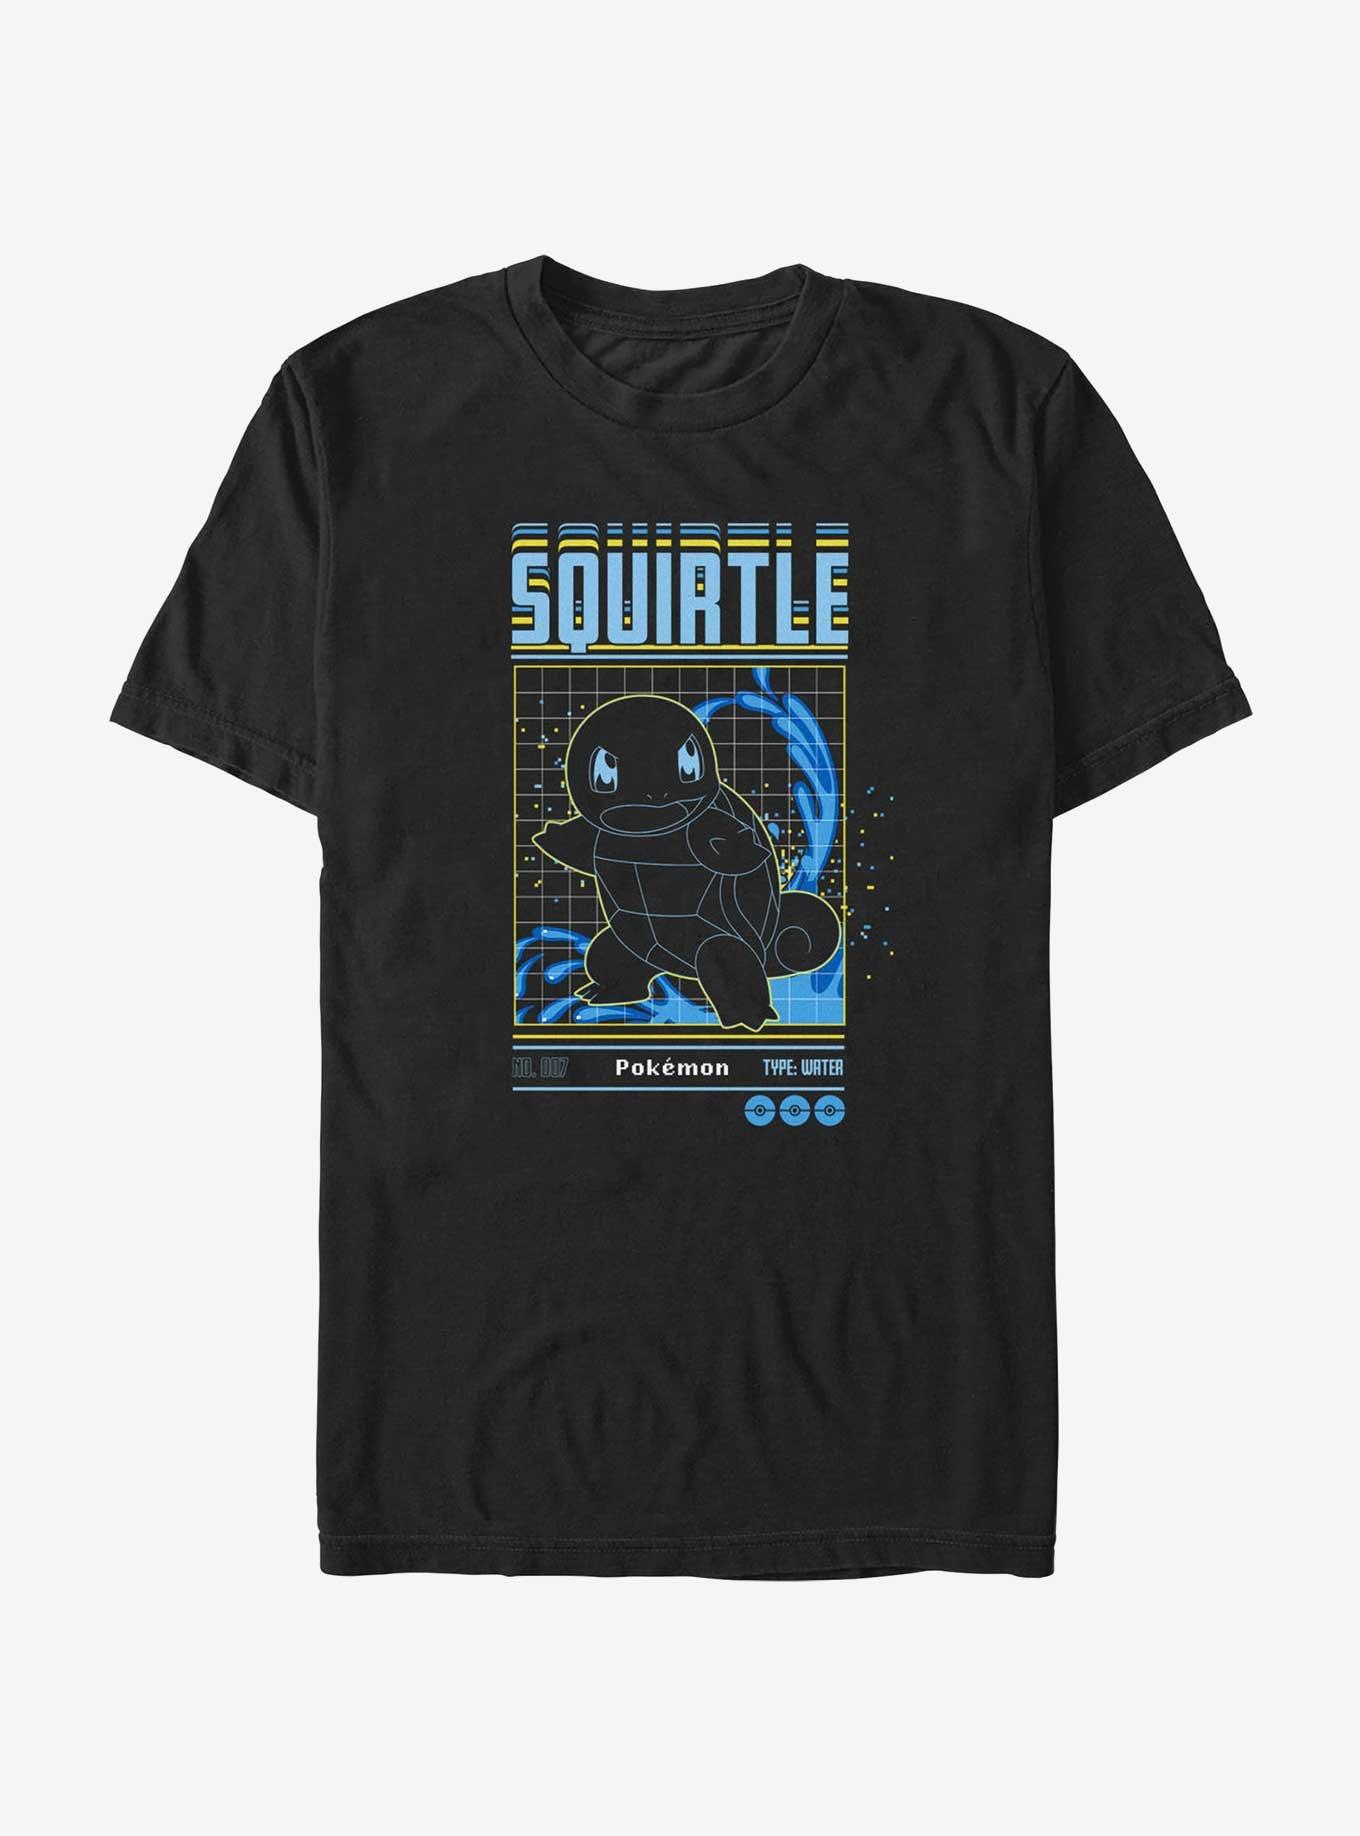 Pokemon Squirtle Grid T-Shirt